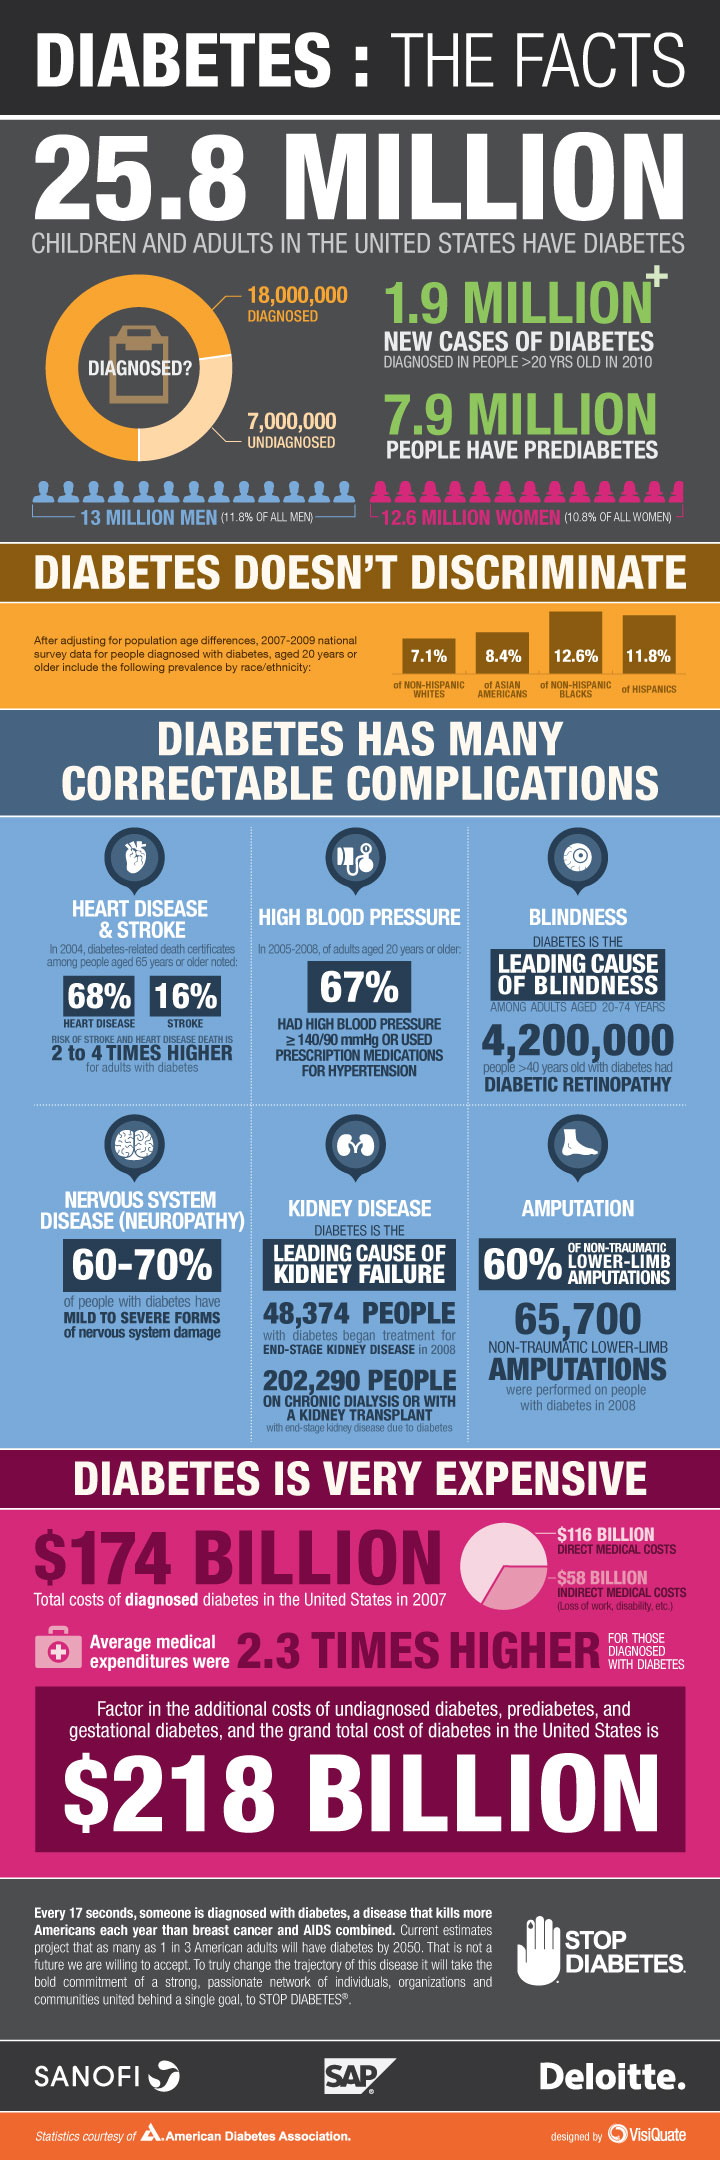 Diabetes Complications and Facts